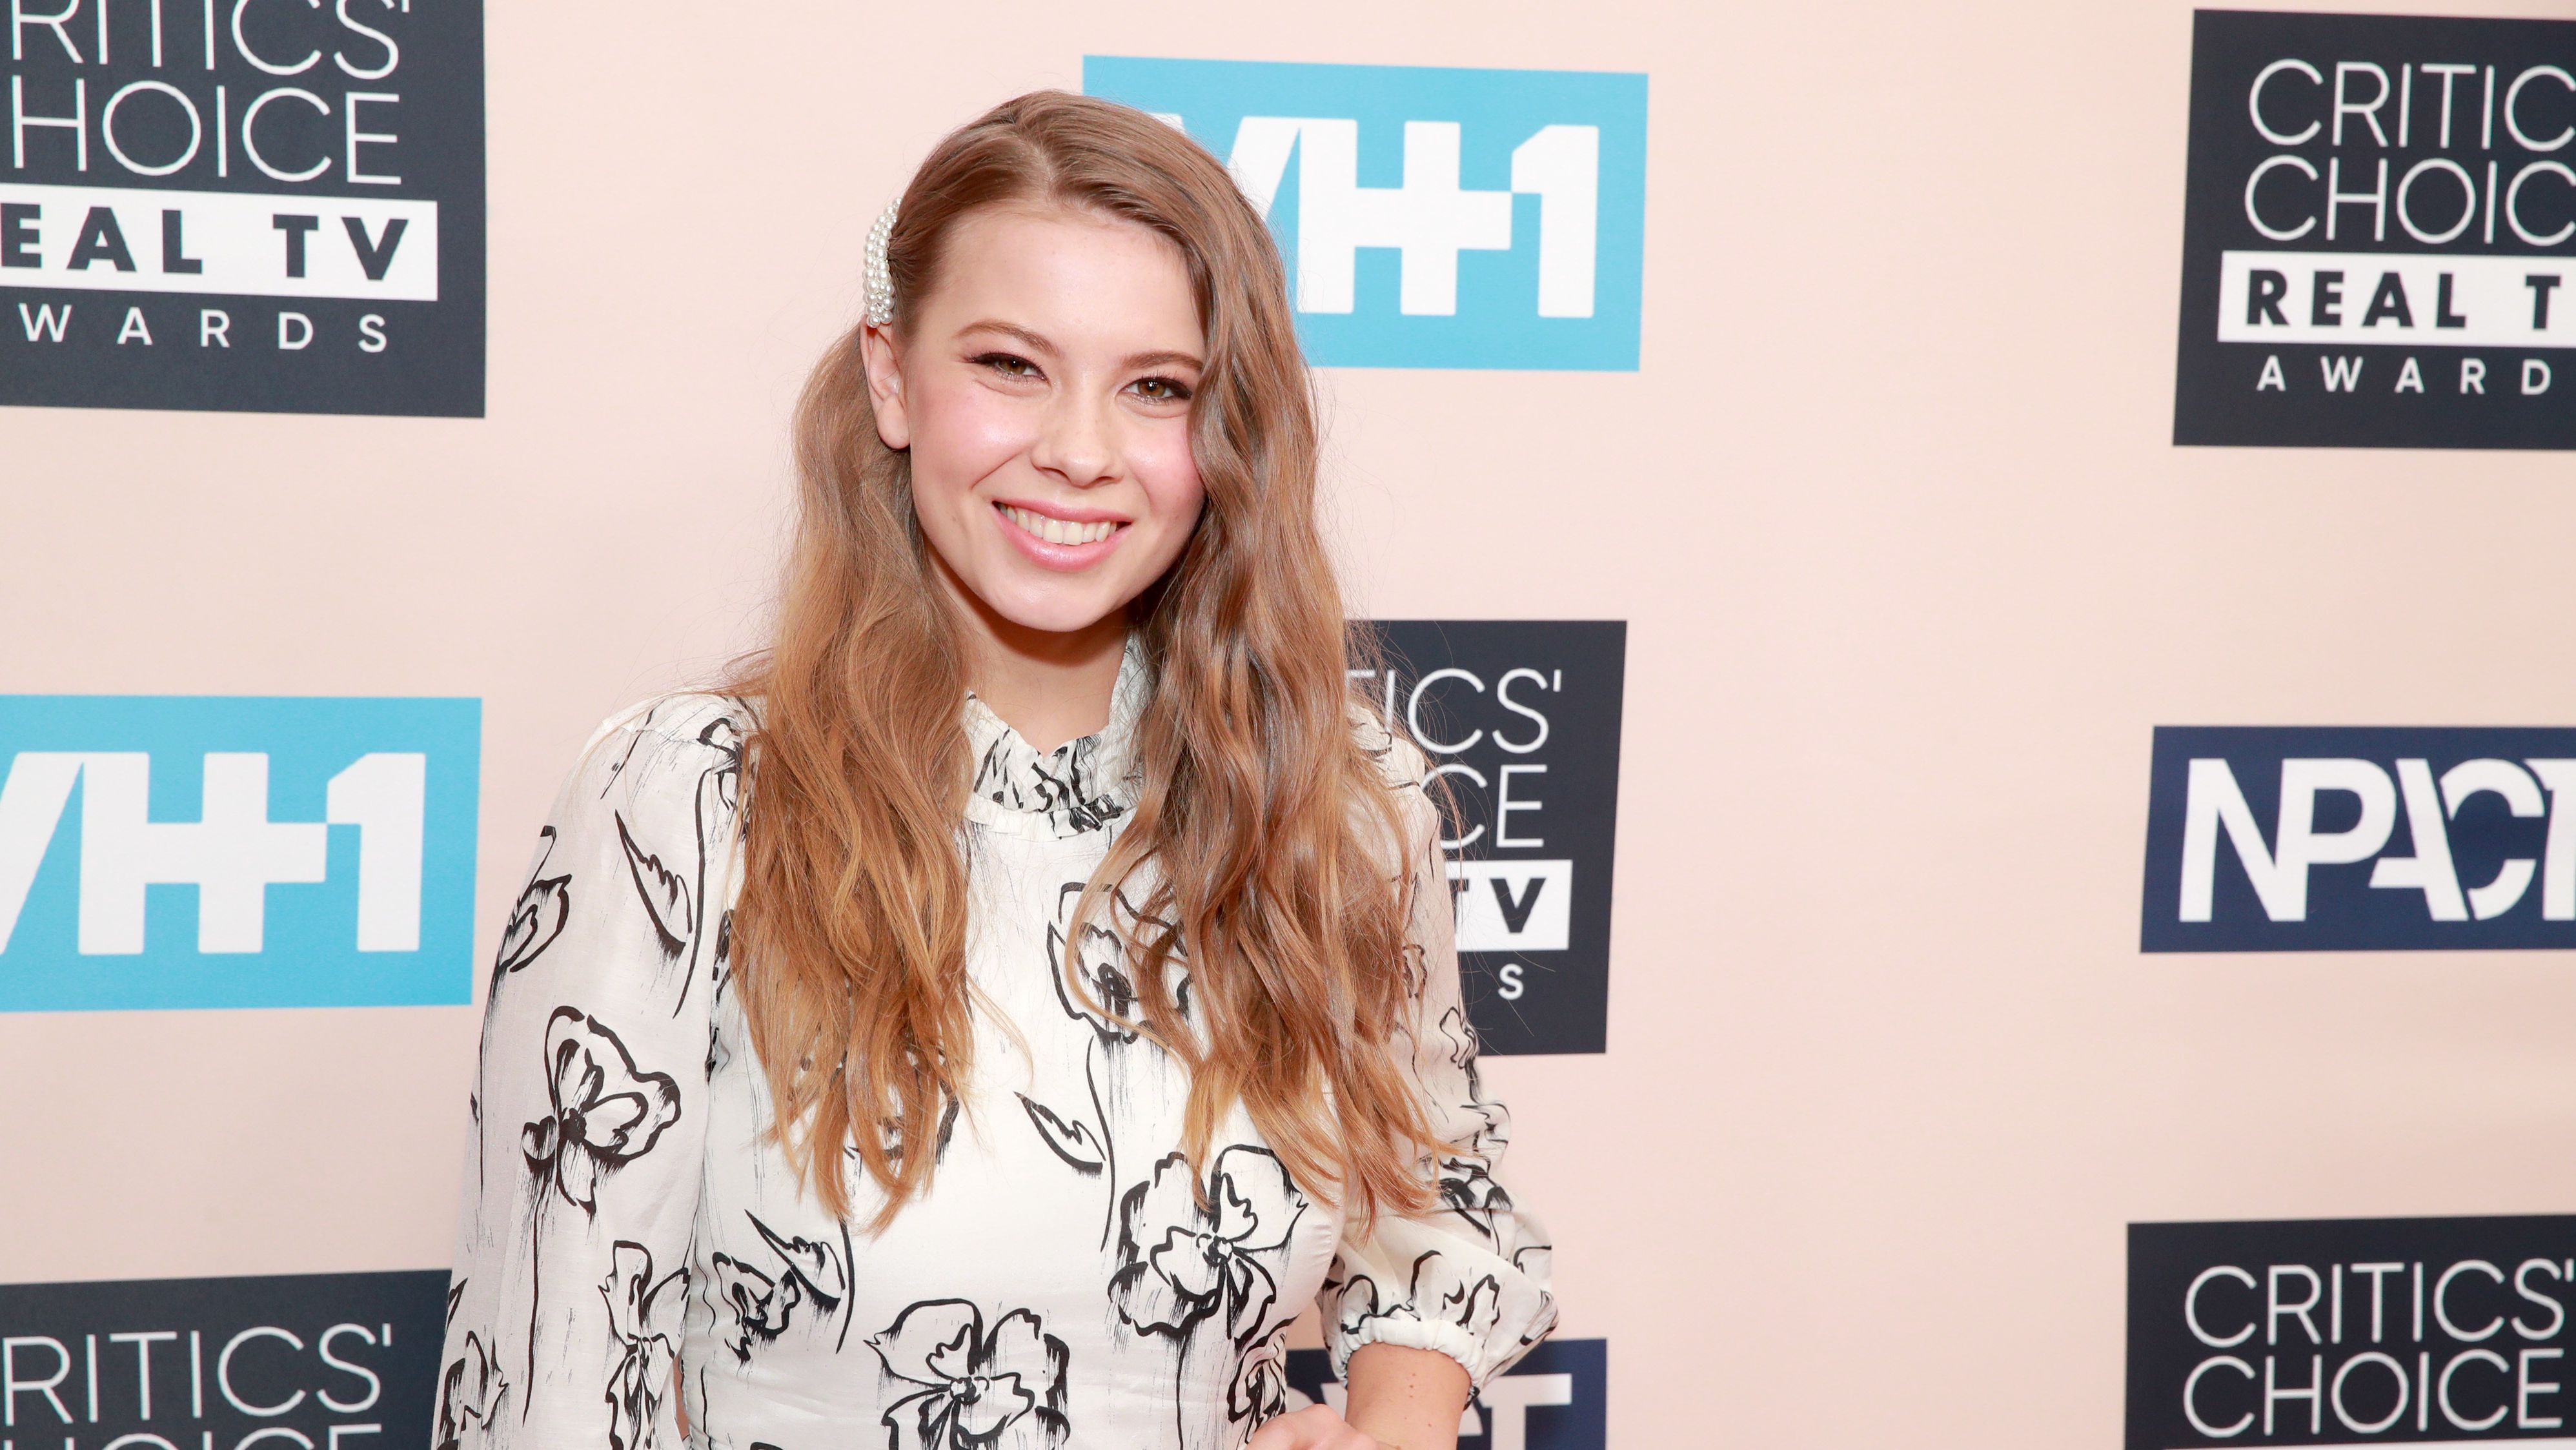 Bindi Irwin attends the Critics' Choice Real TV Awards at The Beverly Hilton Hotel on June 2 in Beverly Hills, California. 